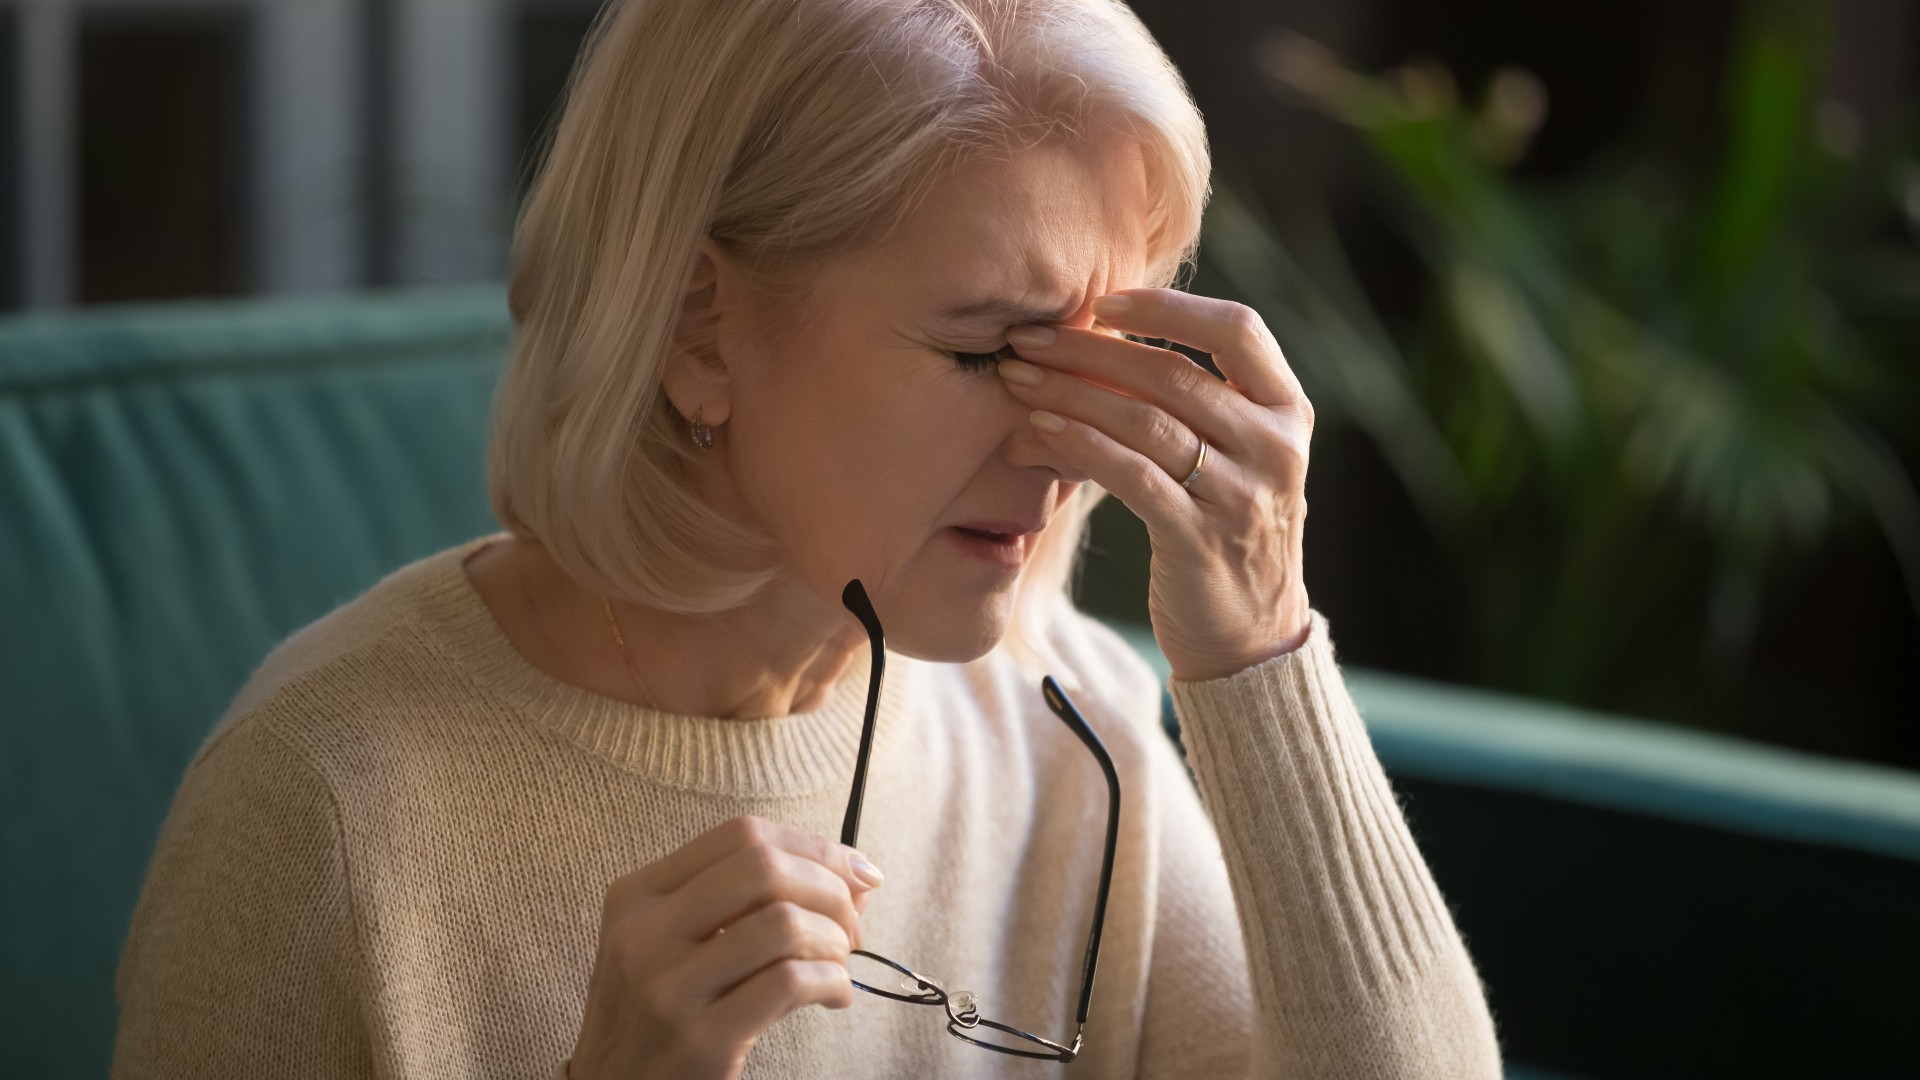 Older lady taking off glasses and rubbing eyes or with a headache_fizkes via Shutterstock